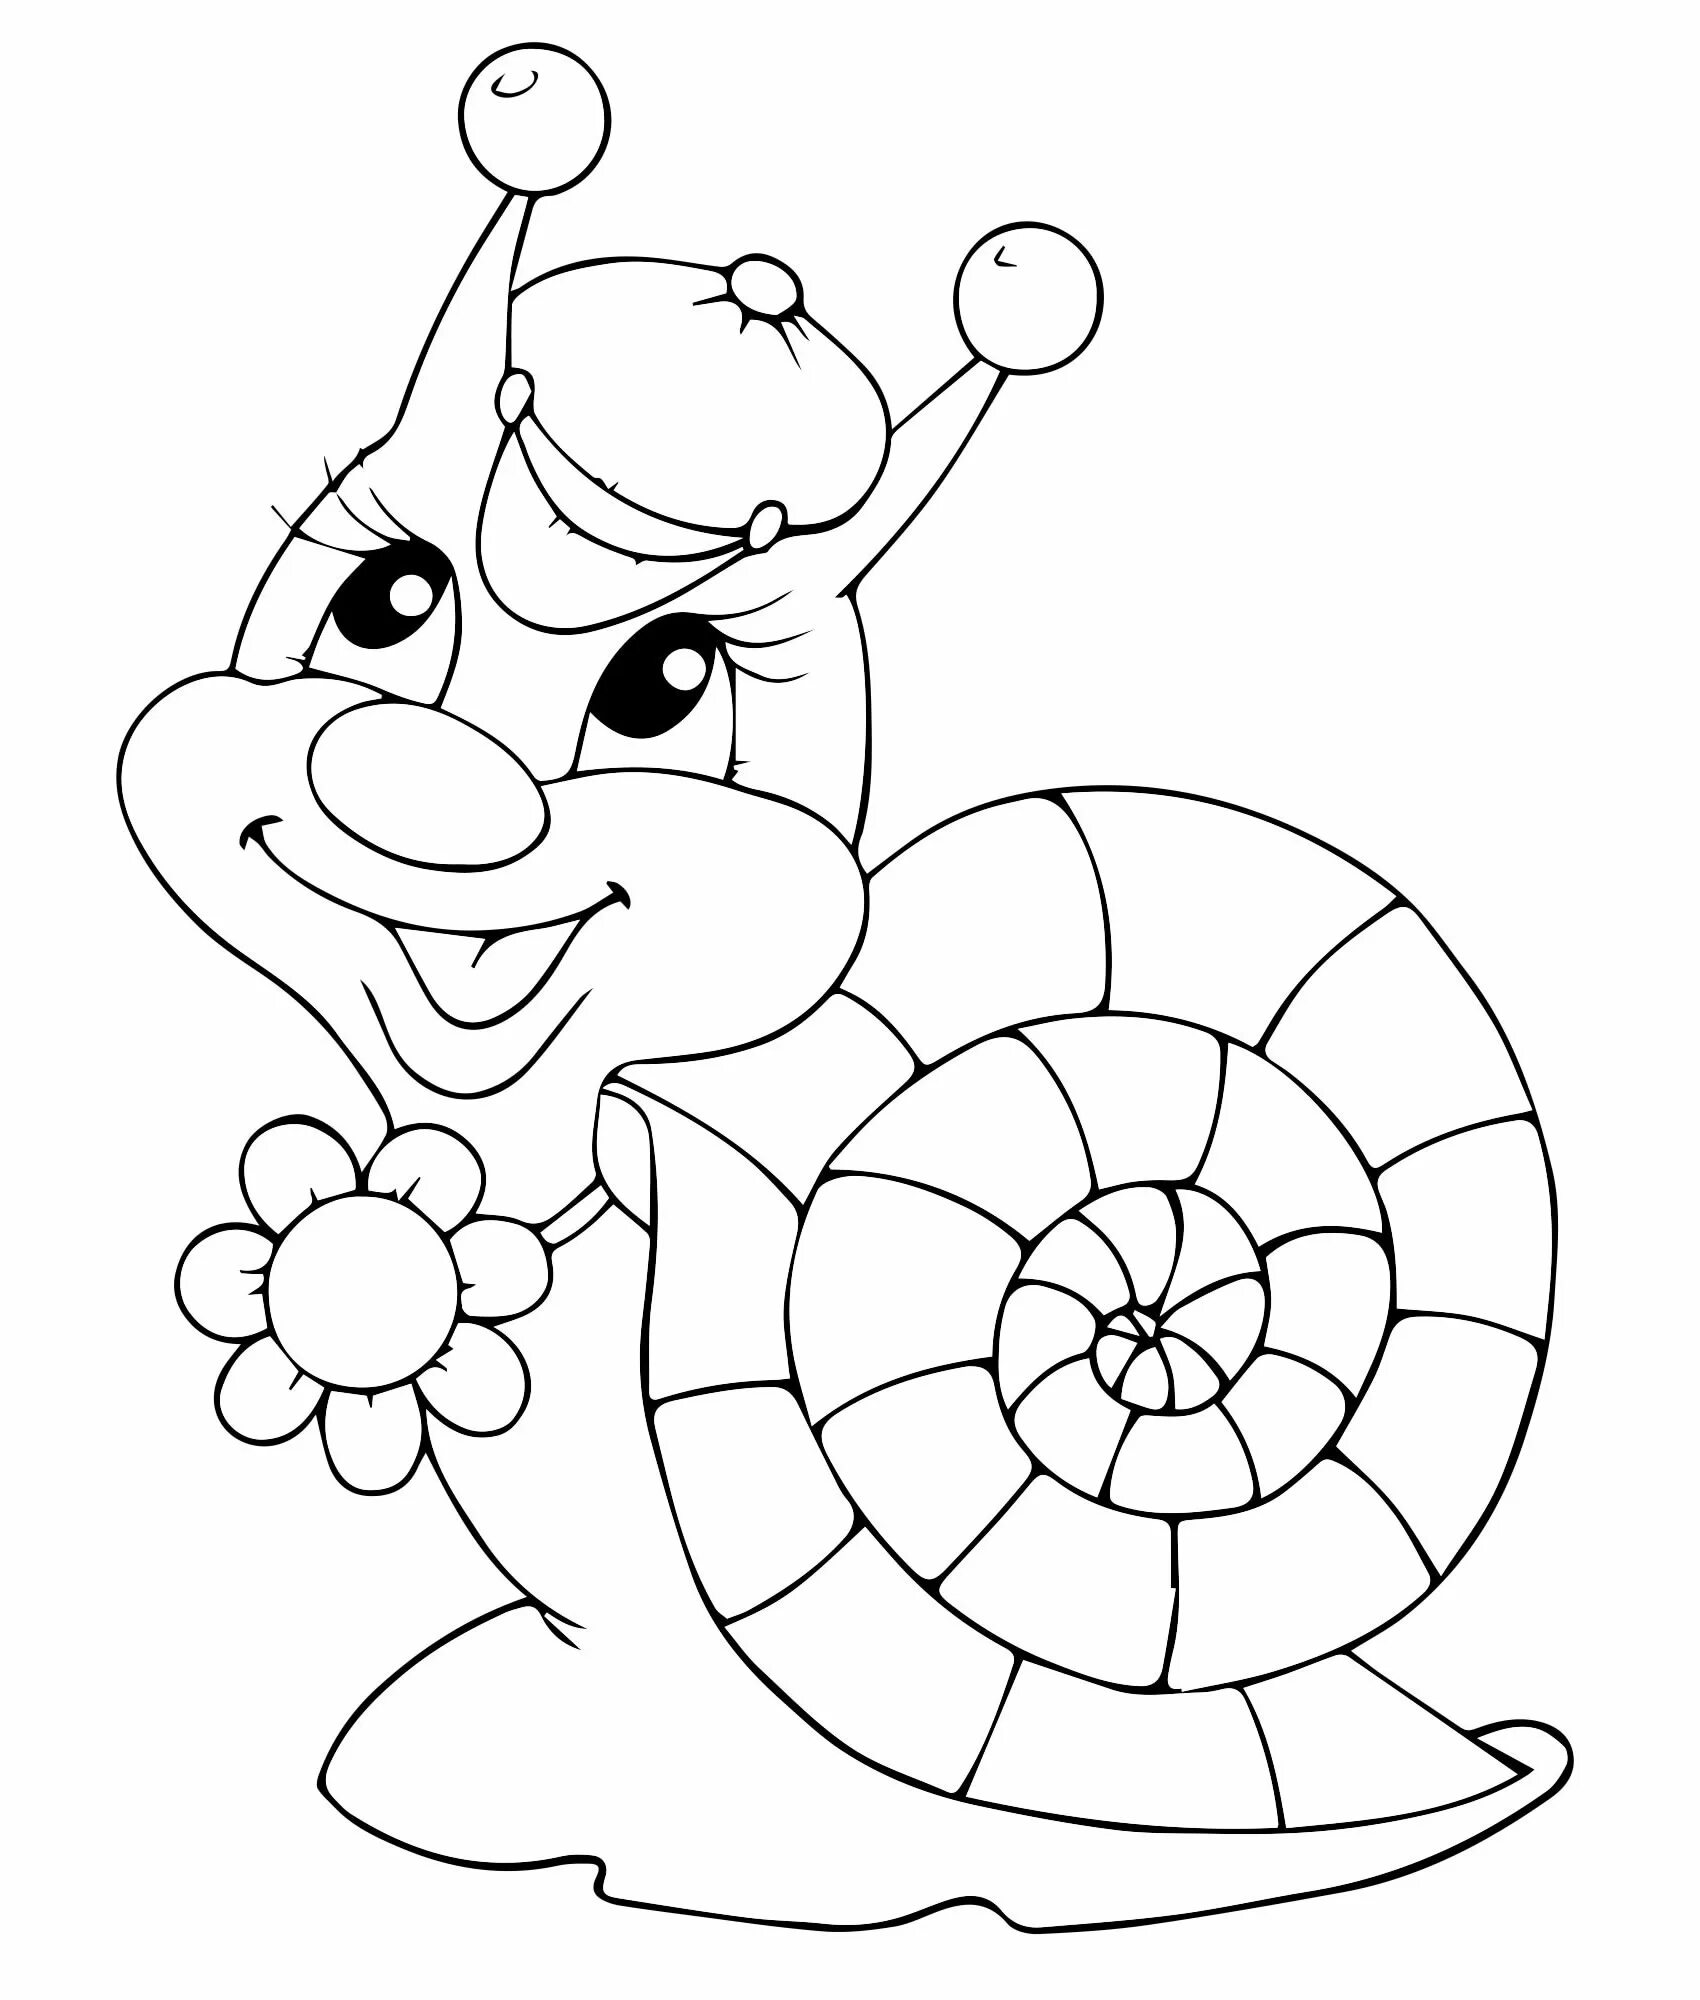 Joyful coloring snail for children 3-4 years old